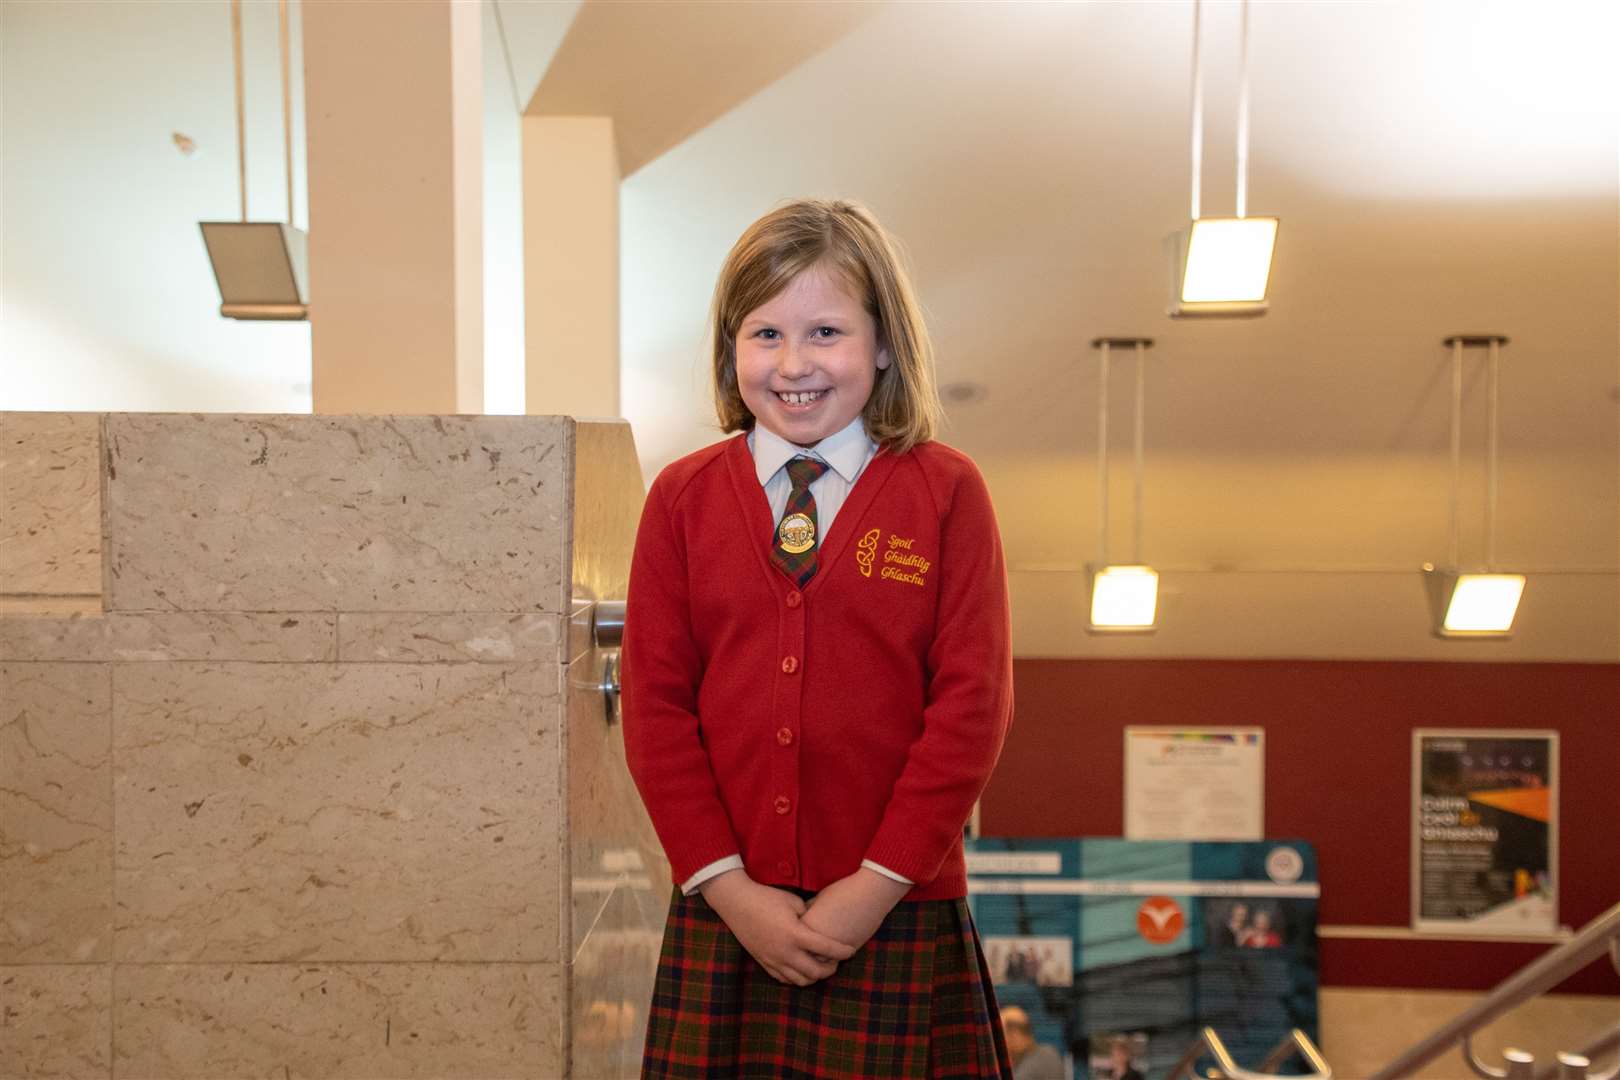 Frankie McDonald (8) of the Glasgow Gaelic school won the traditional girls under-11 category at the Mòd.